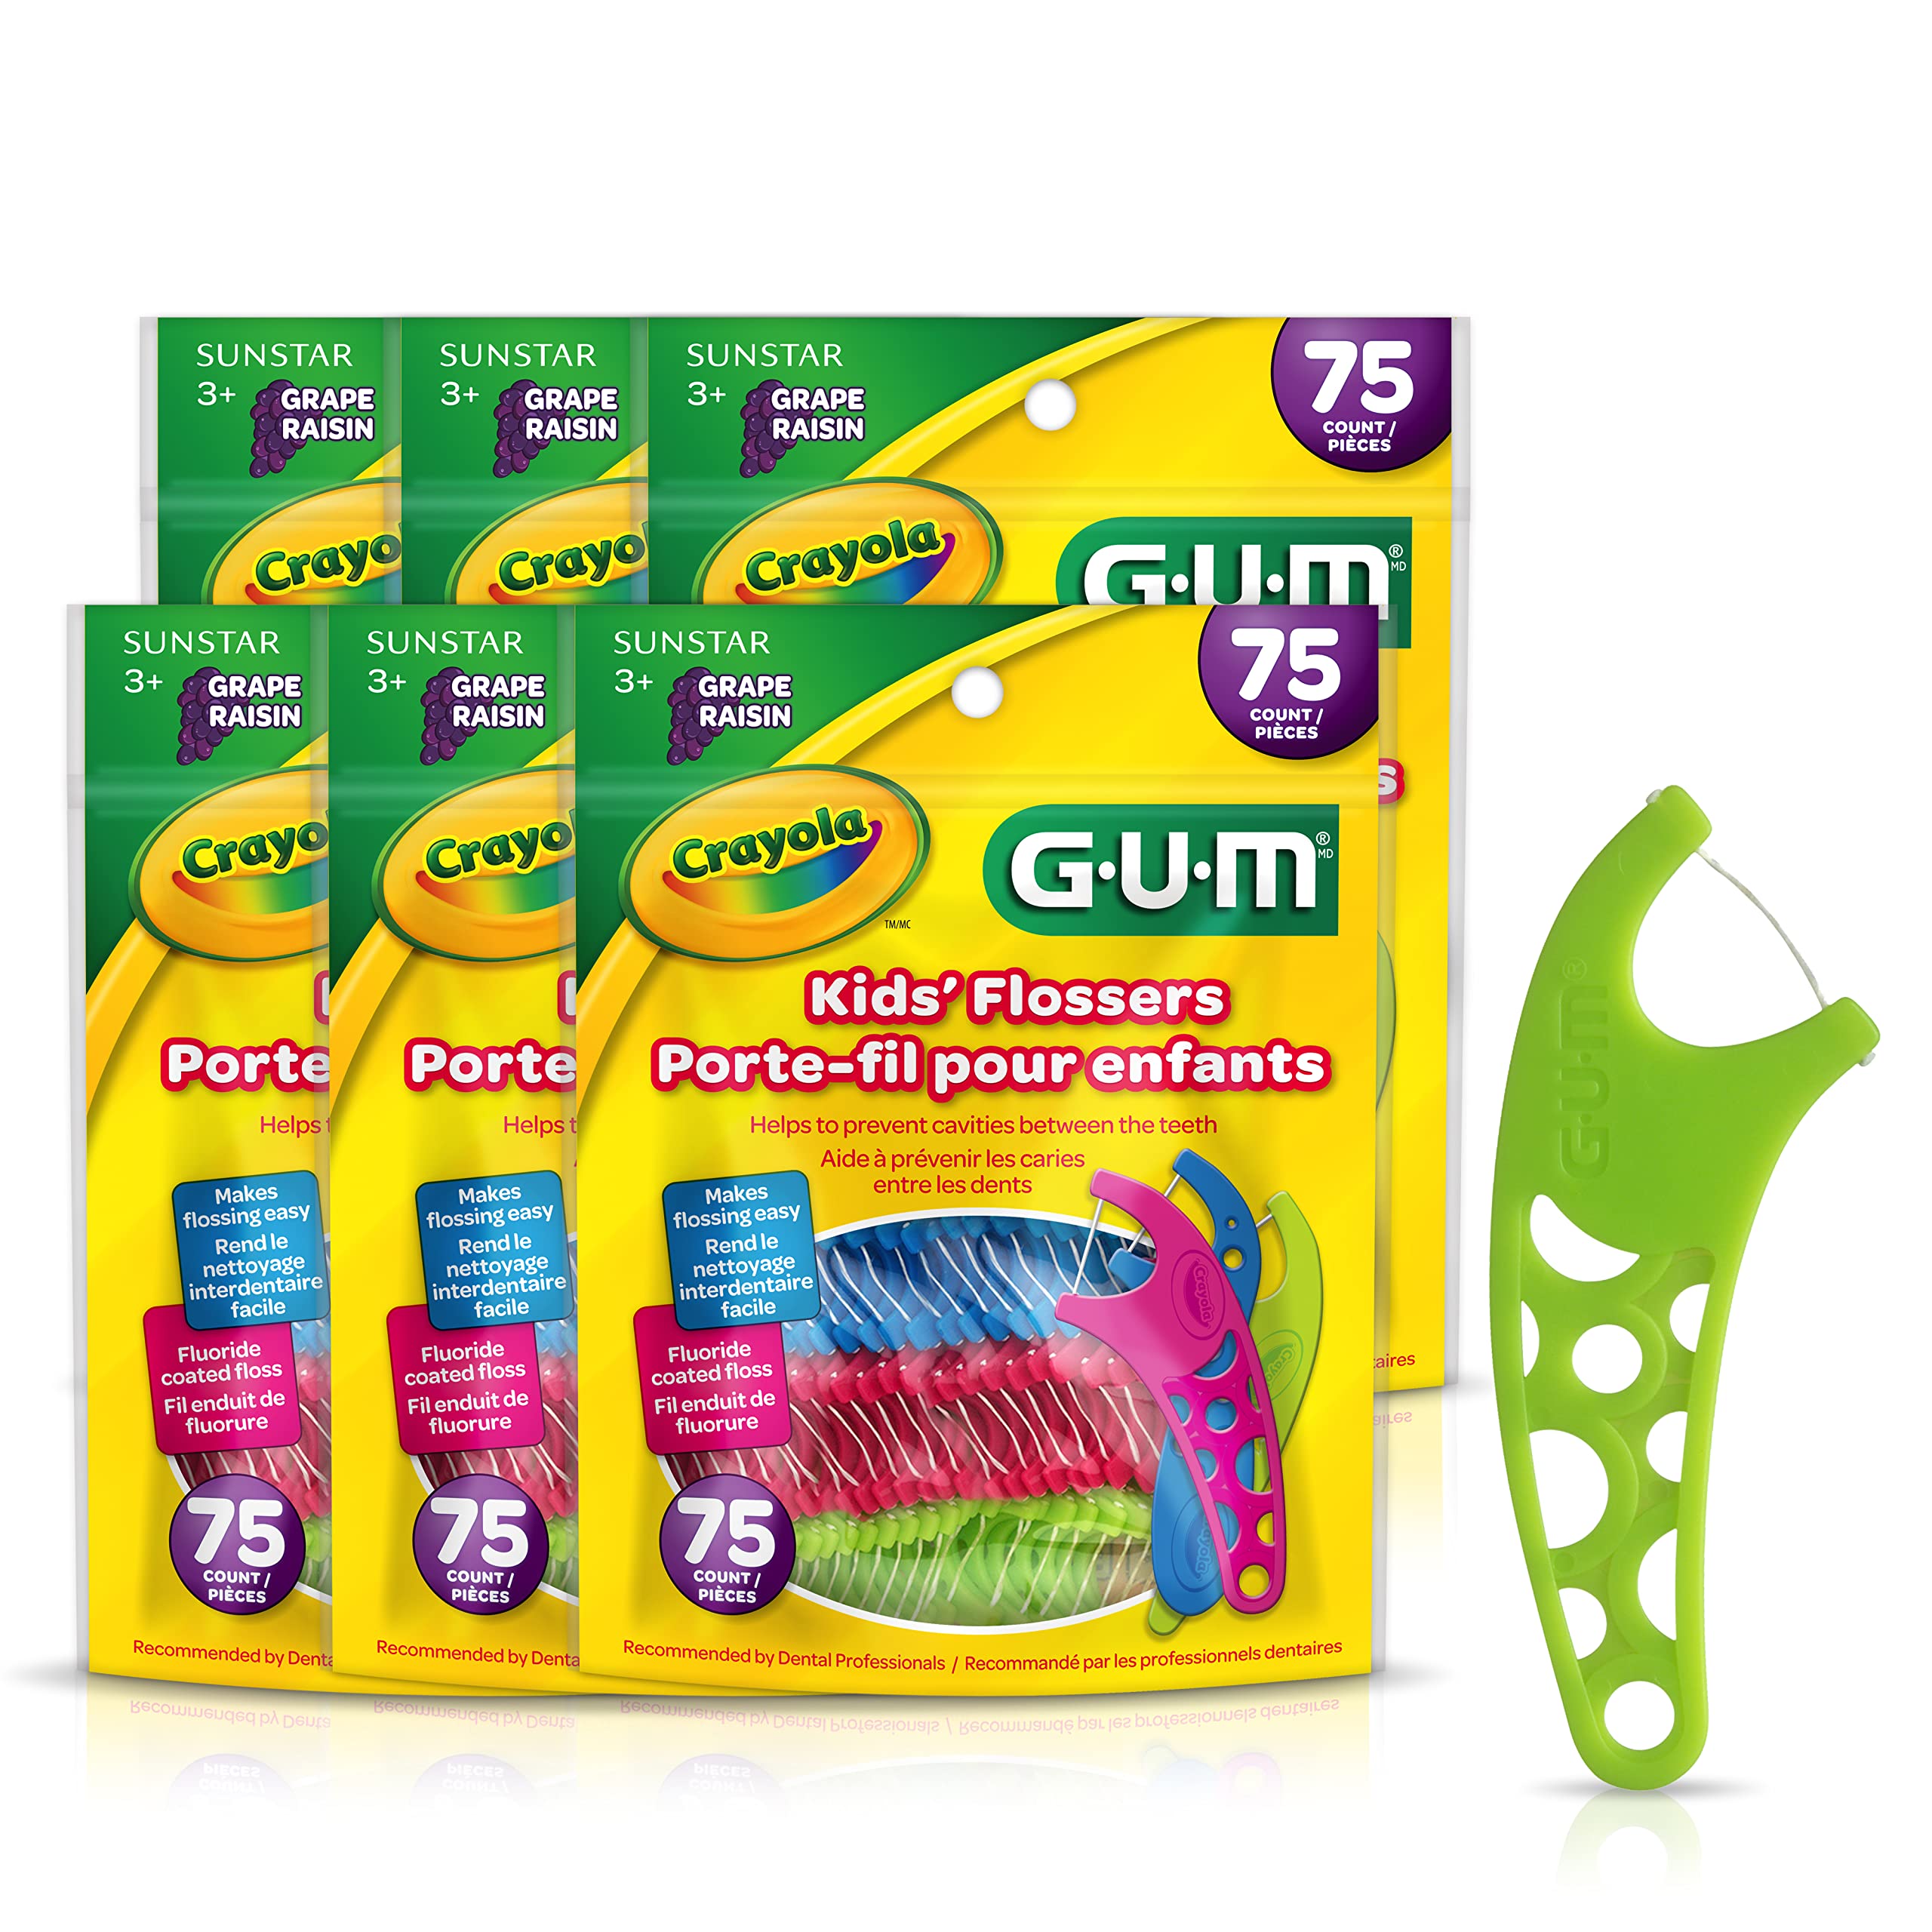 GUM - 70070942306514 Crayola Kids? Flossers, Grape, Fluoride Coated, Easy Grip Handle, Ages 3+, 75 Count, (Pack of 6)